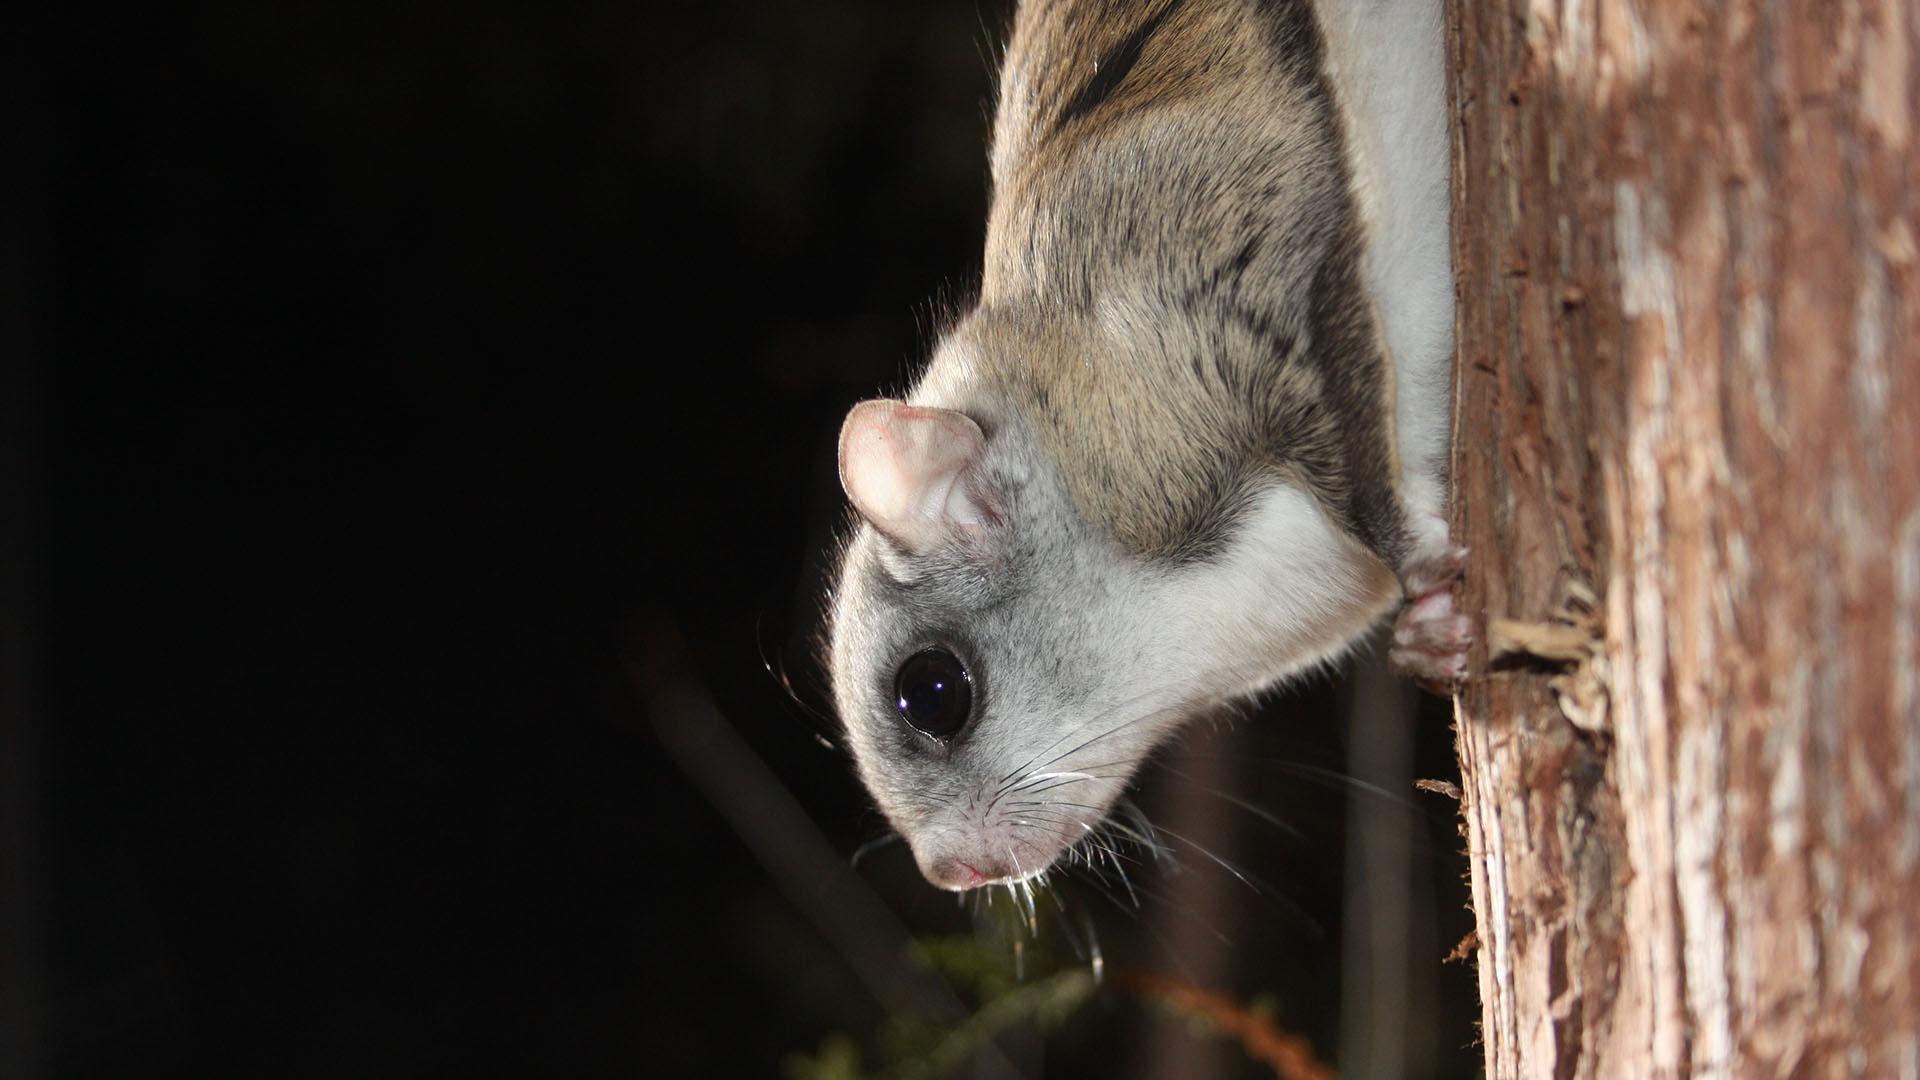 A Northern Flying squirrel prepares to fly between trees in a search for food in the forest.